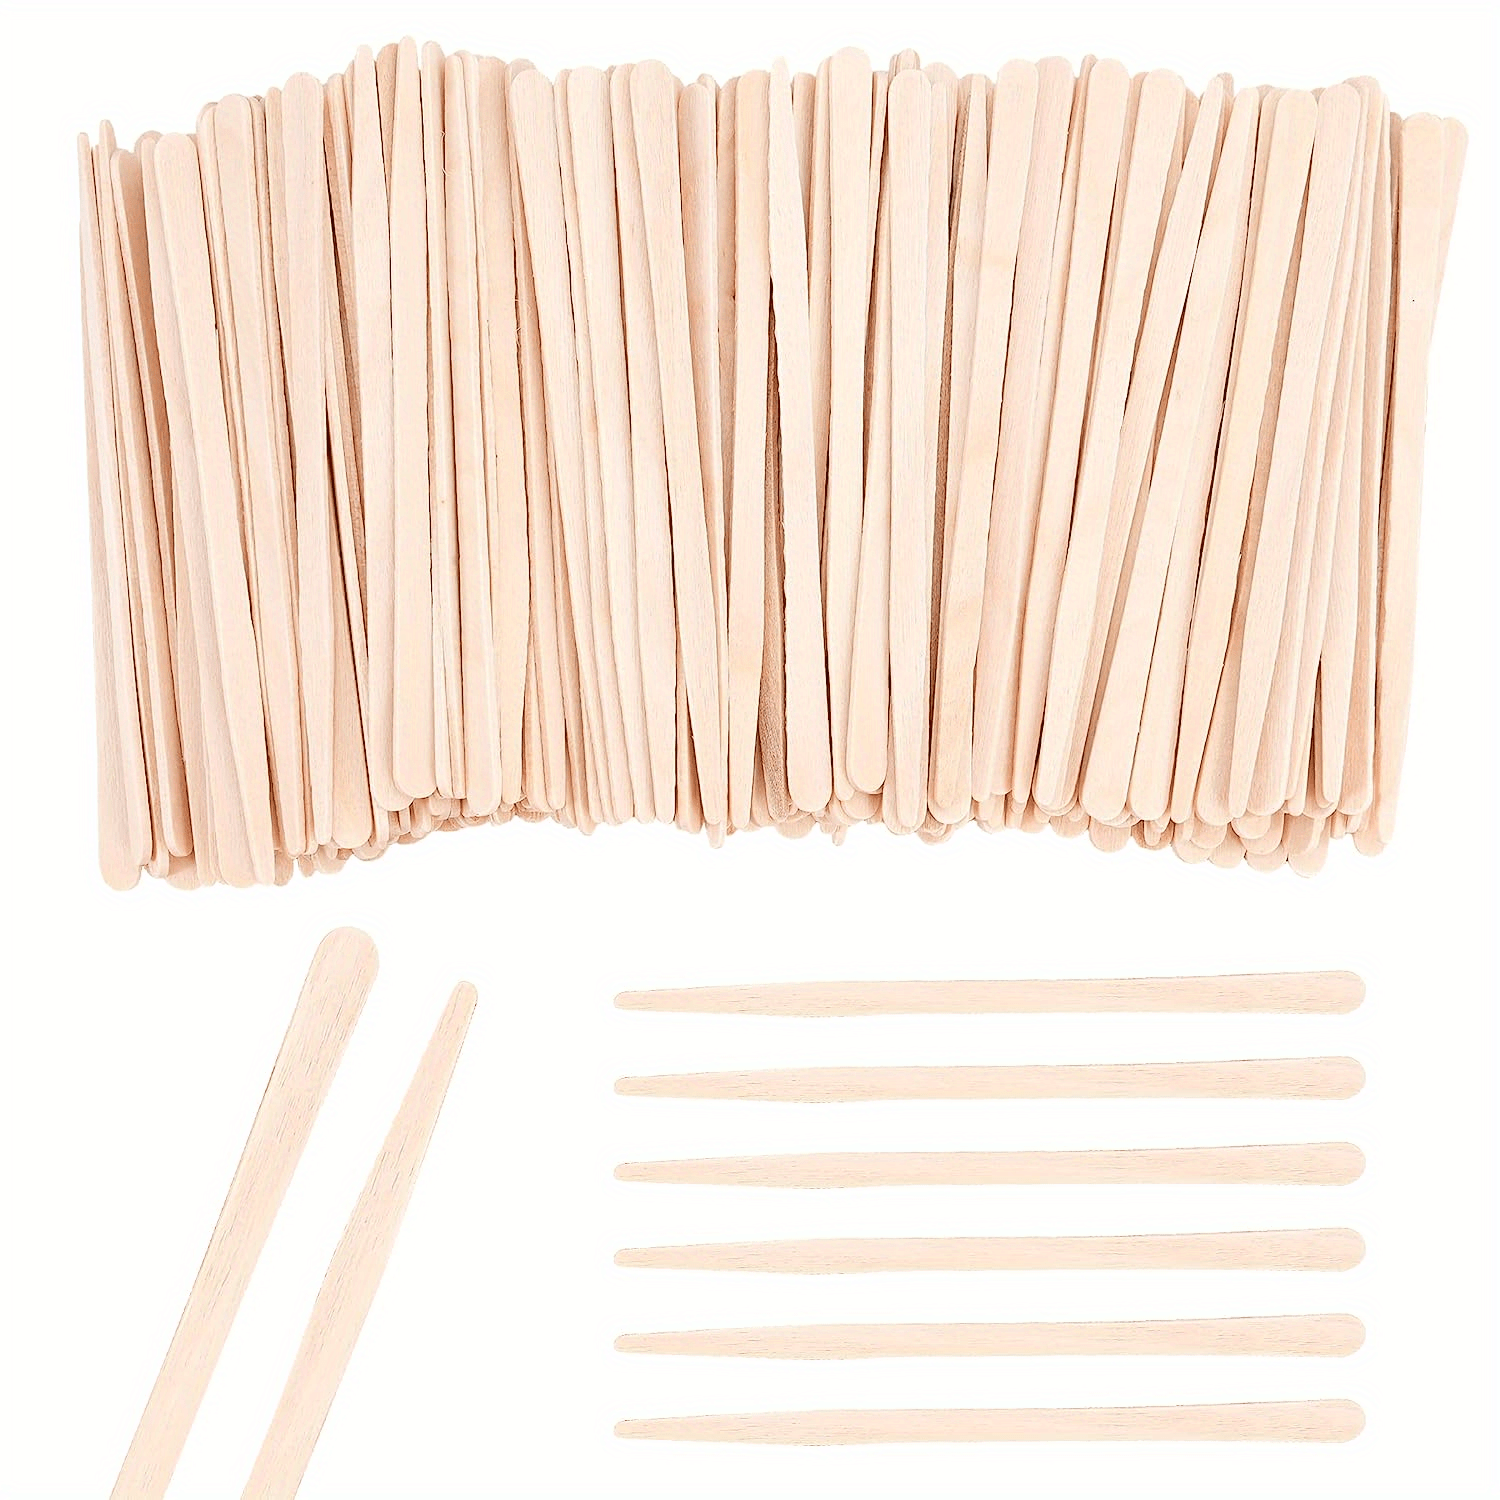 200 Pcs Eyebrow Wax Sticks Wax Applicator, Wood Wax Spatulas for Face and Small Hair Removal Sticks (Without Handle)